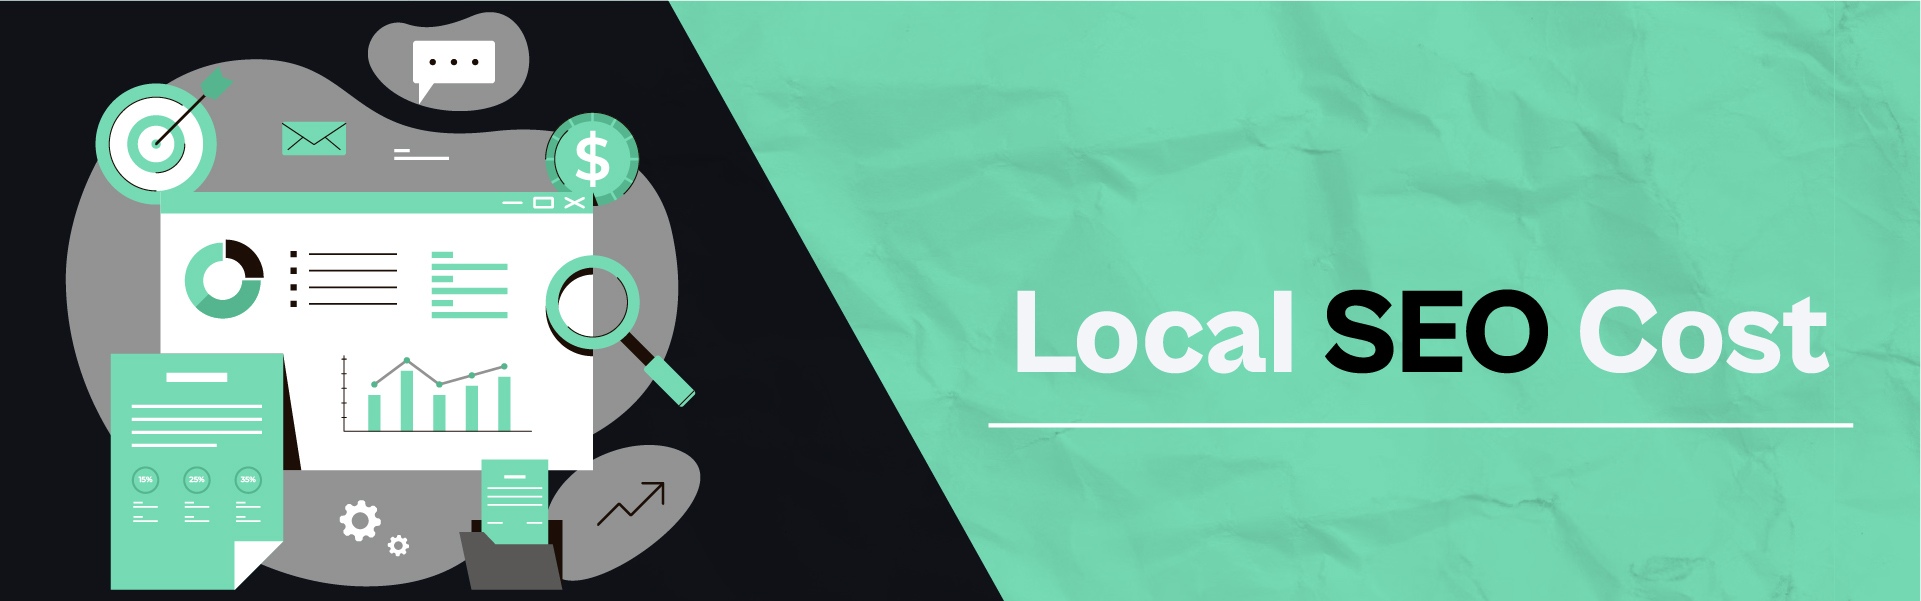 Local SEO cost for brands